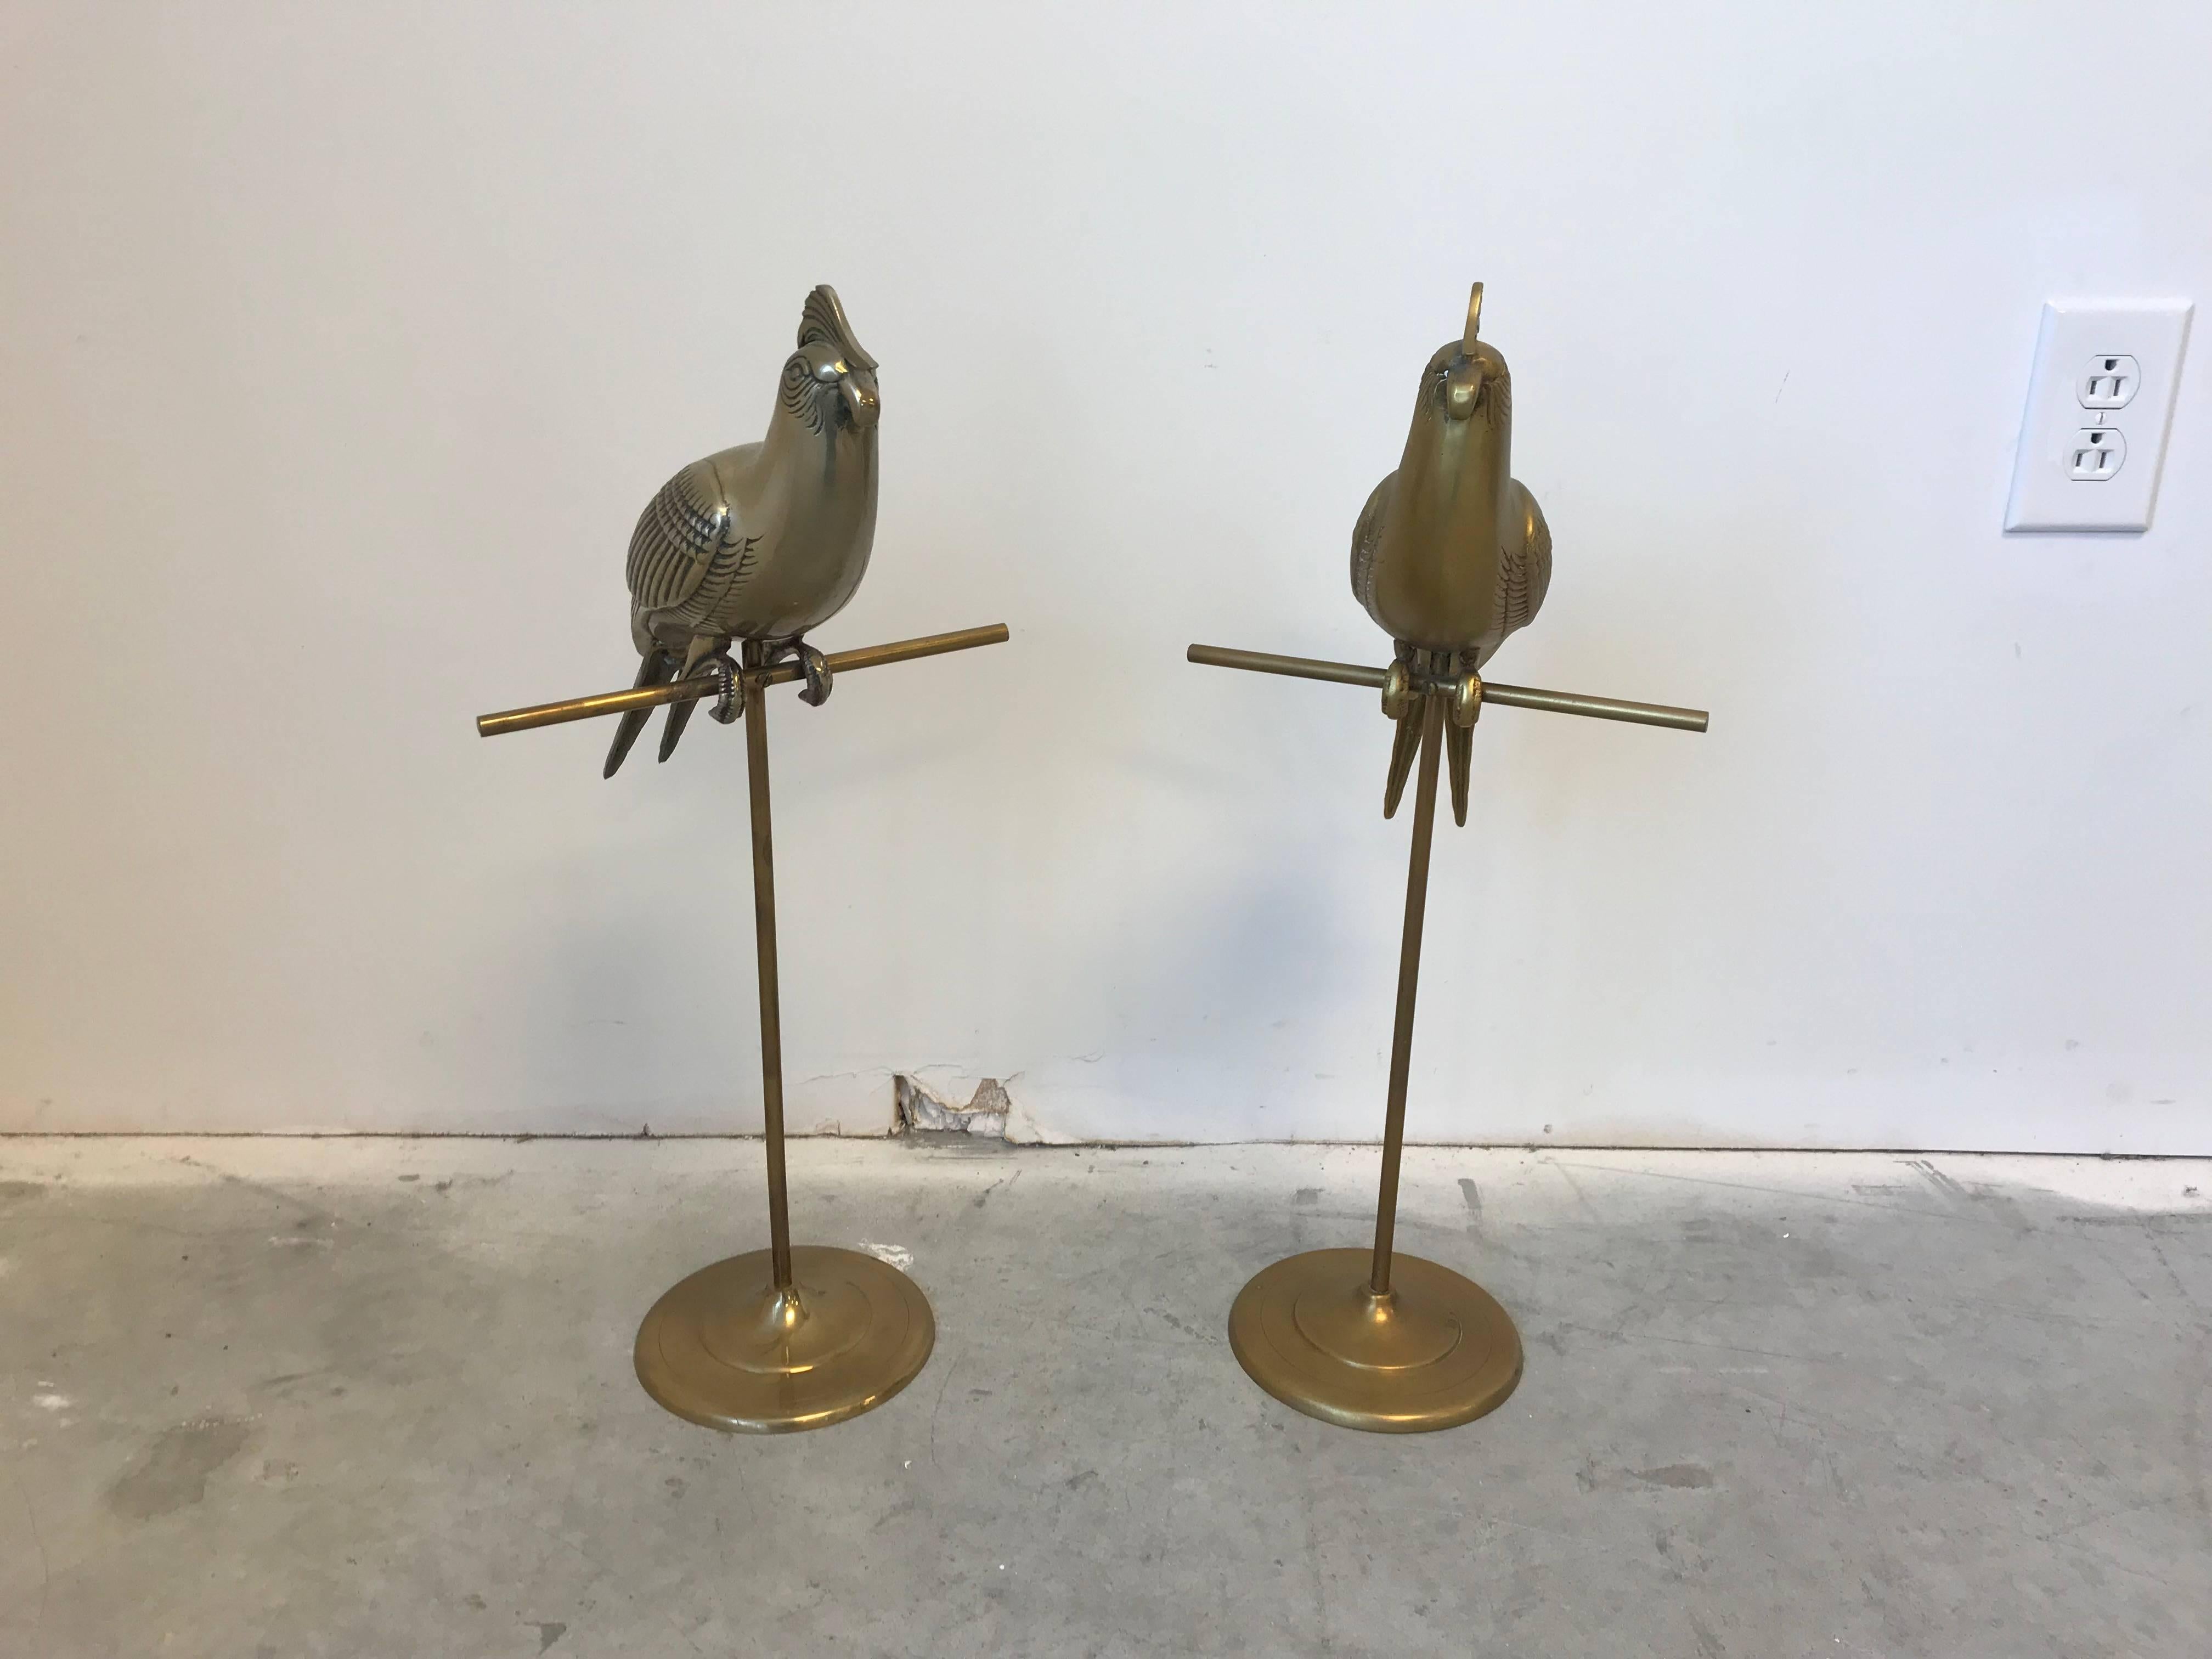 Offered is a beautiful, pair of 1960s Sergio Bustamante style brass cockatiel bird sculptures on a perches.